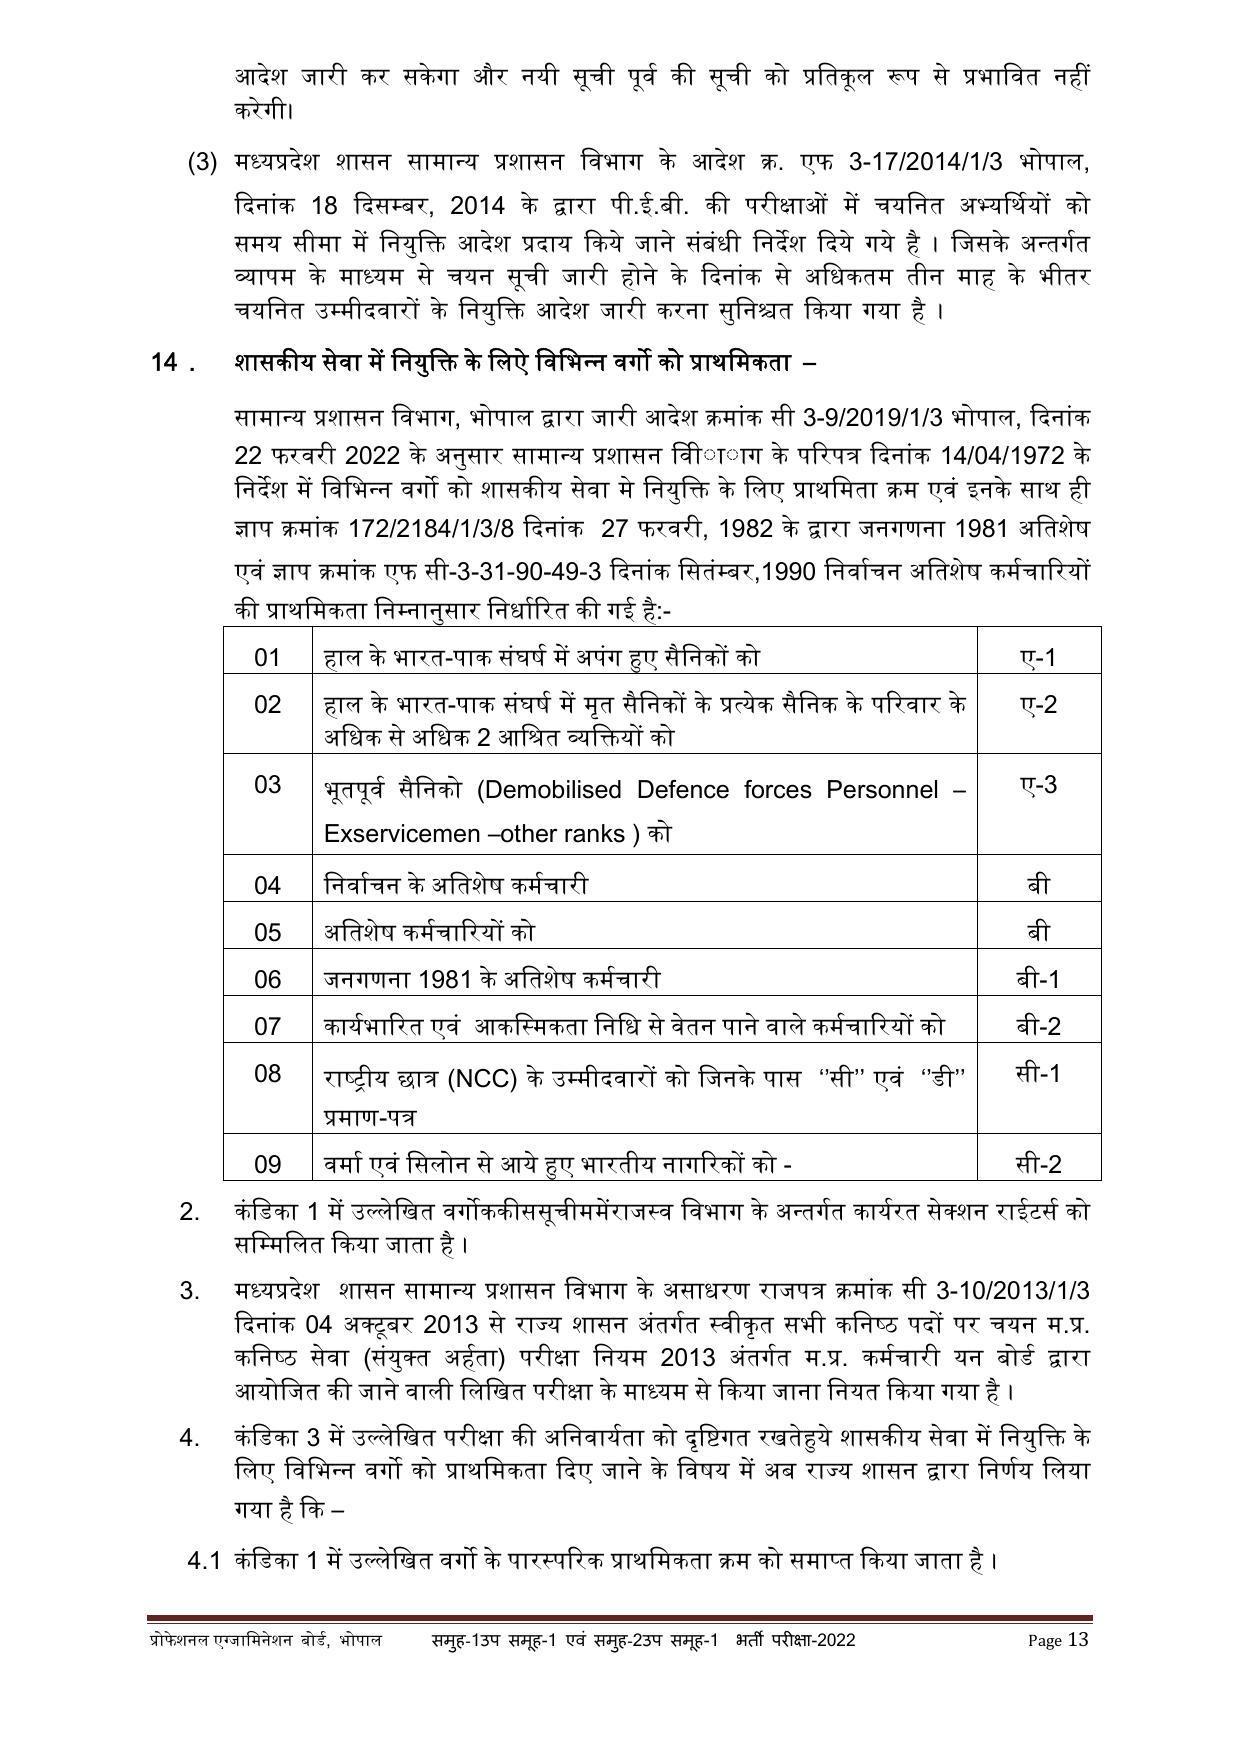 MPPEB Group-I Sub Group-I & Group-II Sub Group-I Recruitment 2022 - Page 52